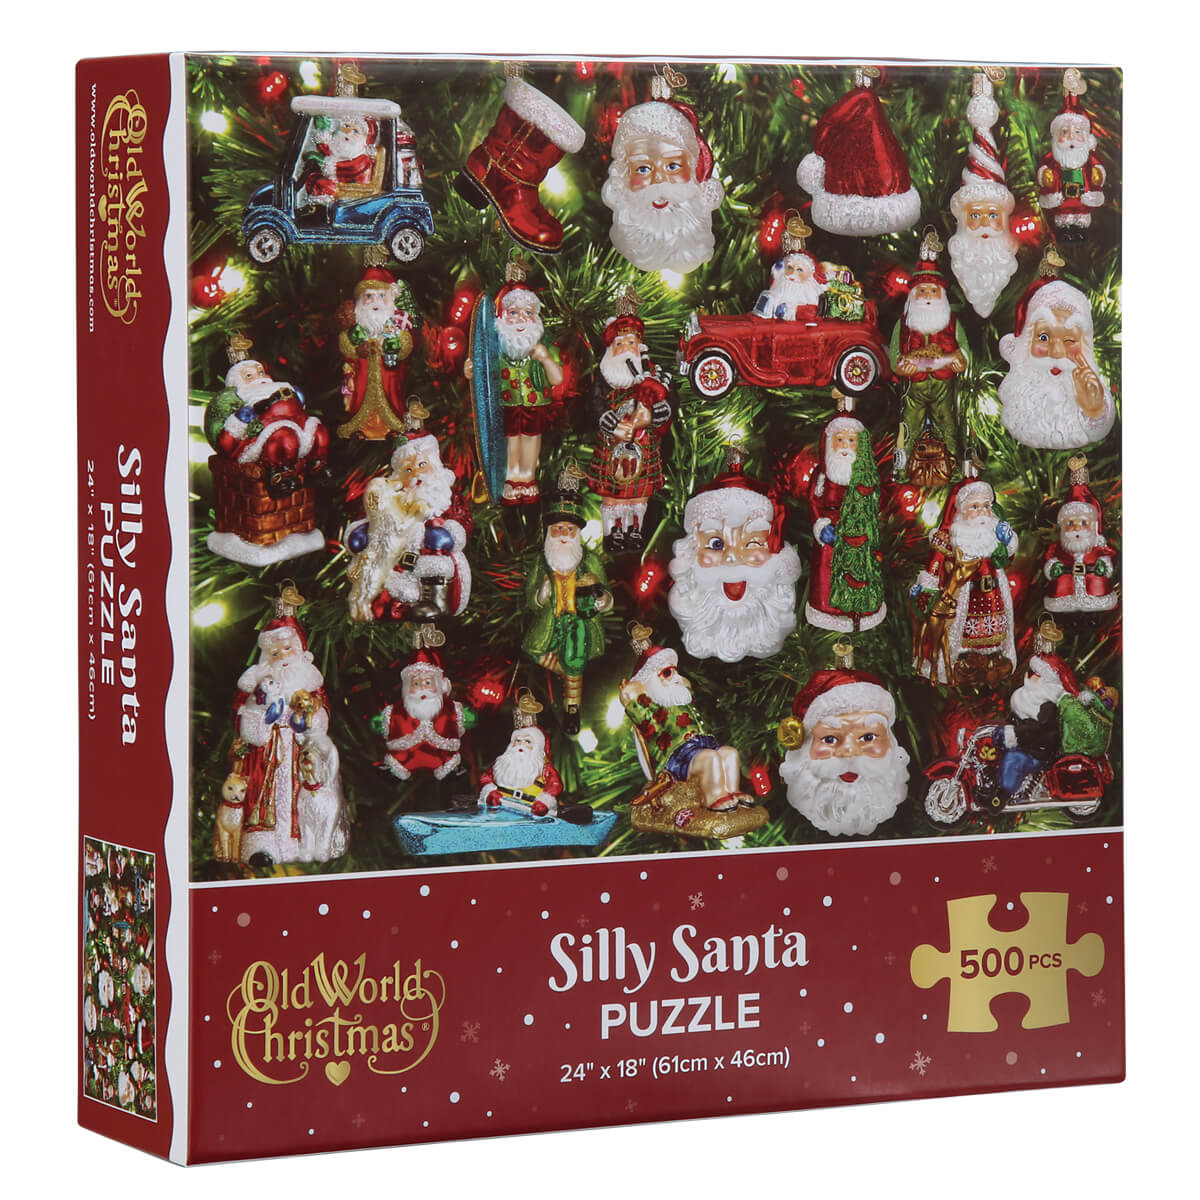 Silly Santa Puzzle